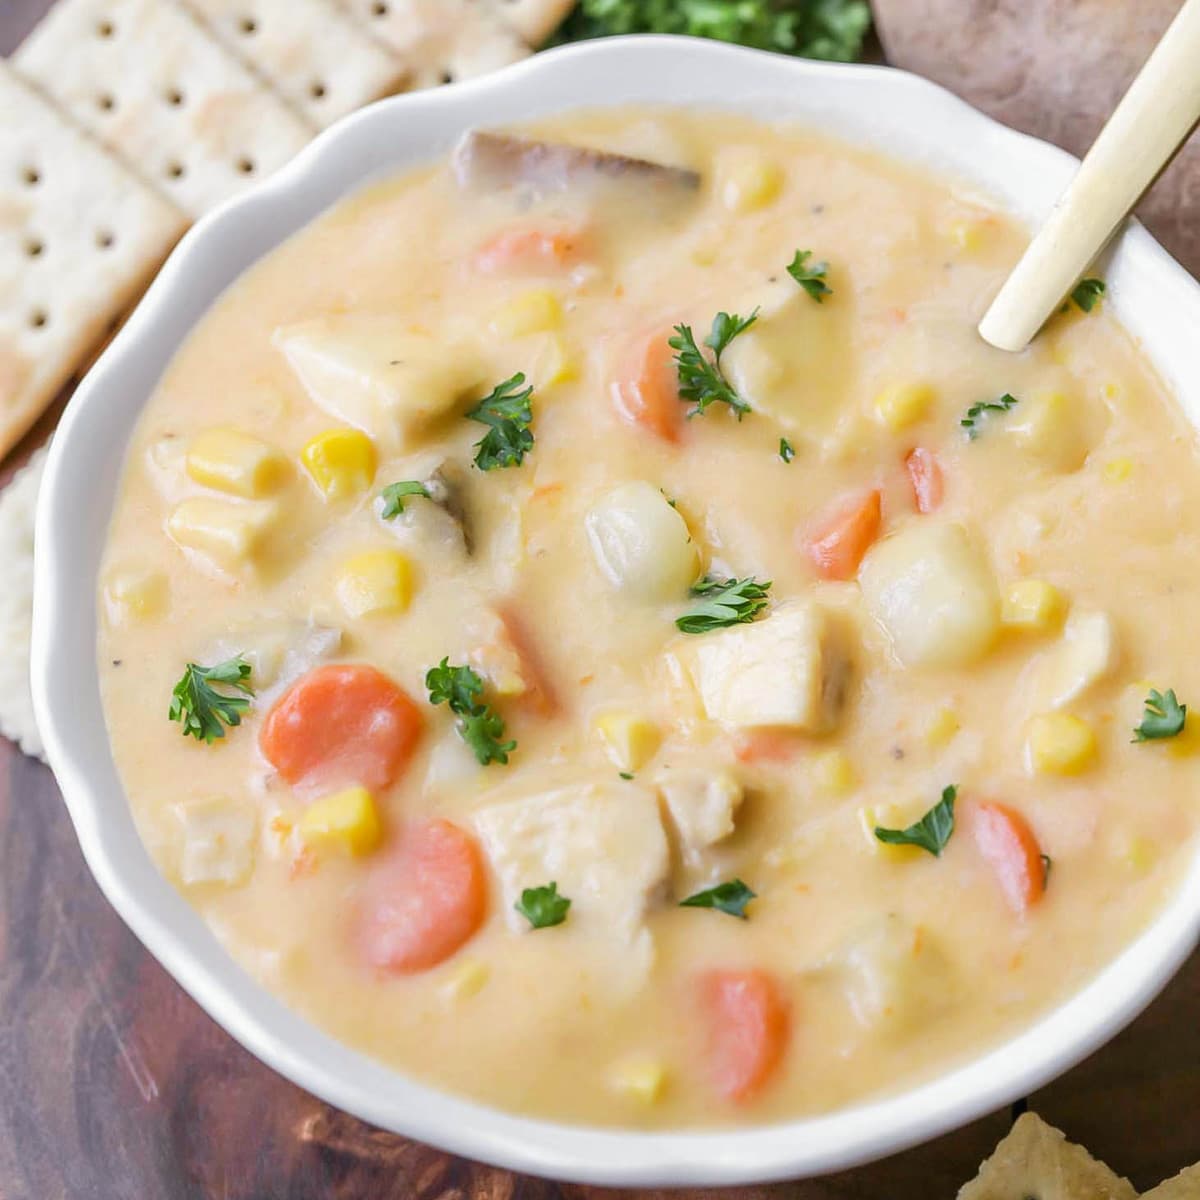 Easy soup recipes - Chicken corn chowder in a white bowl with a spoon.